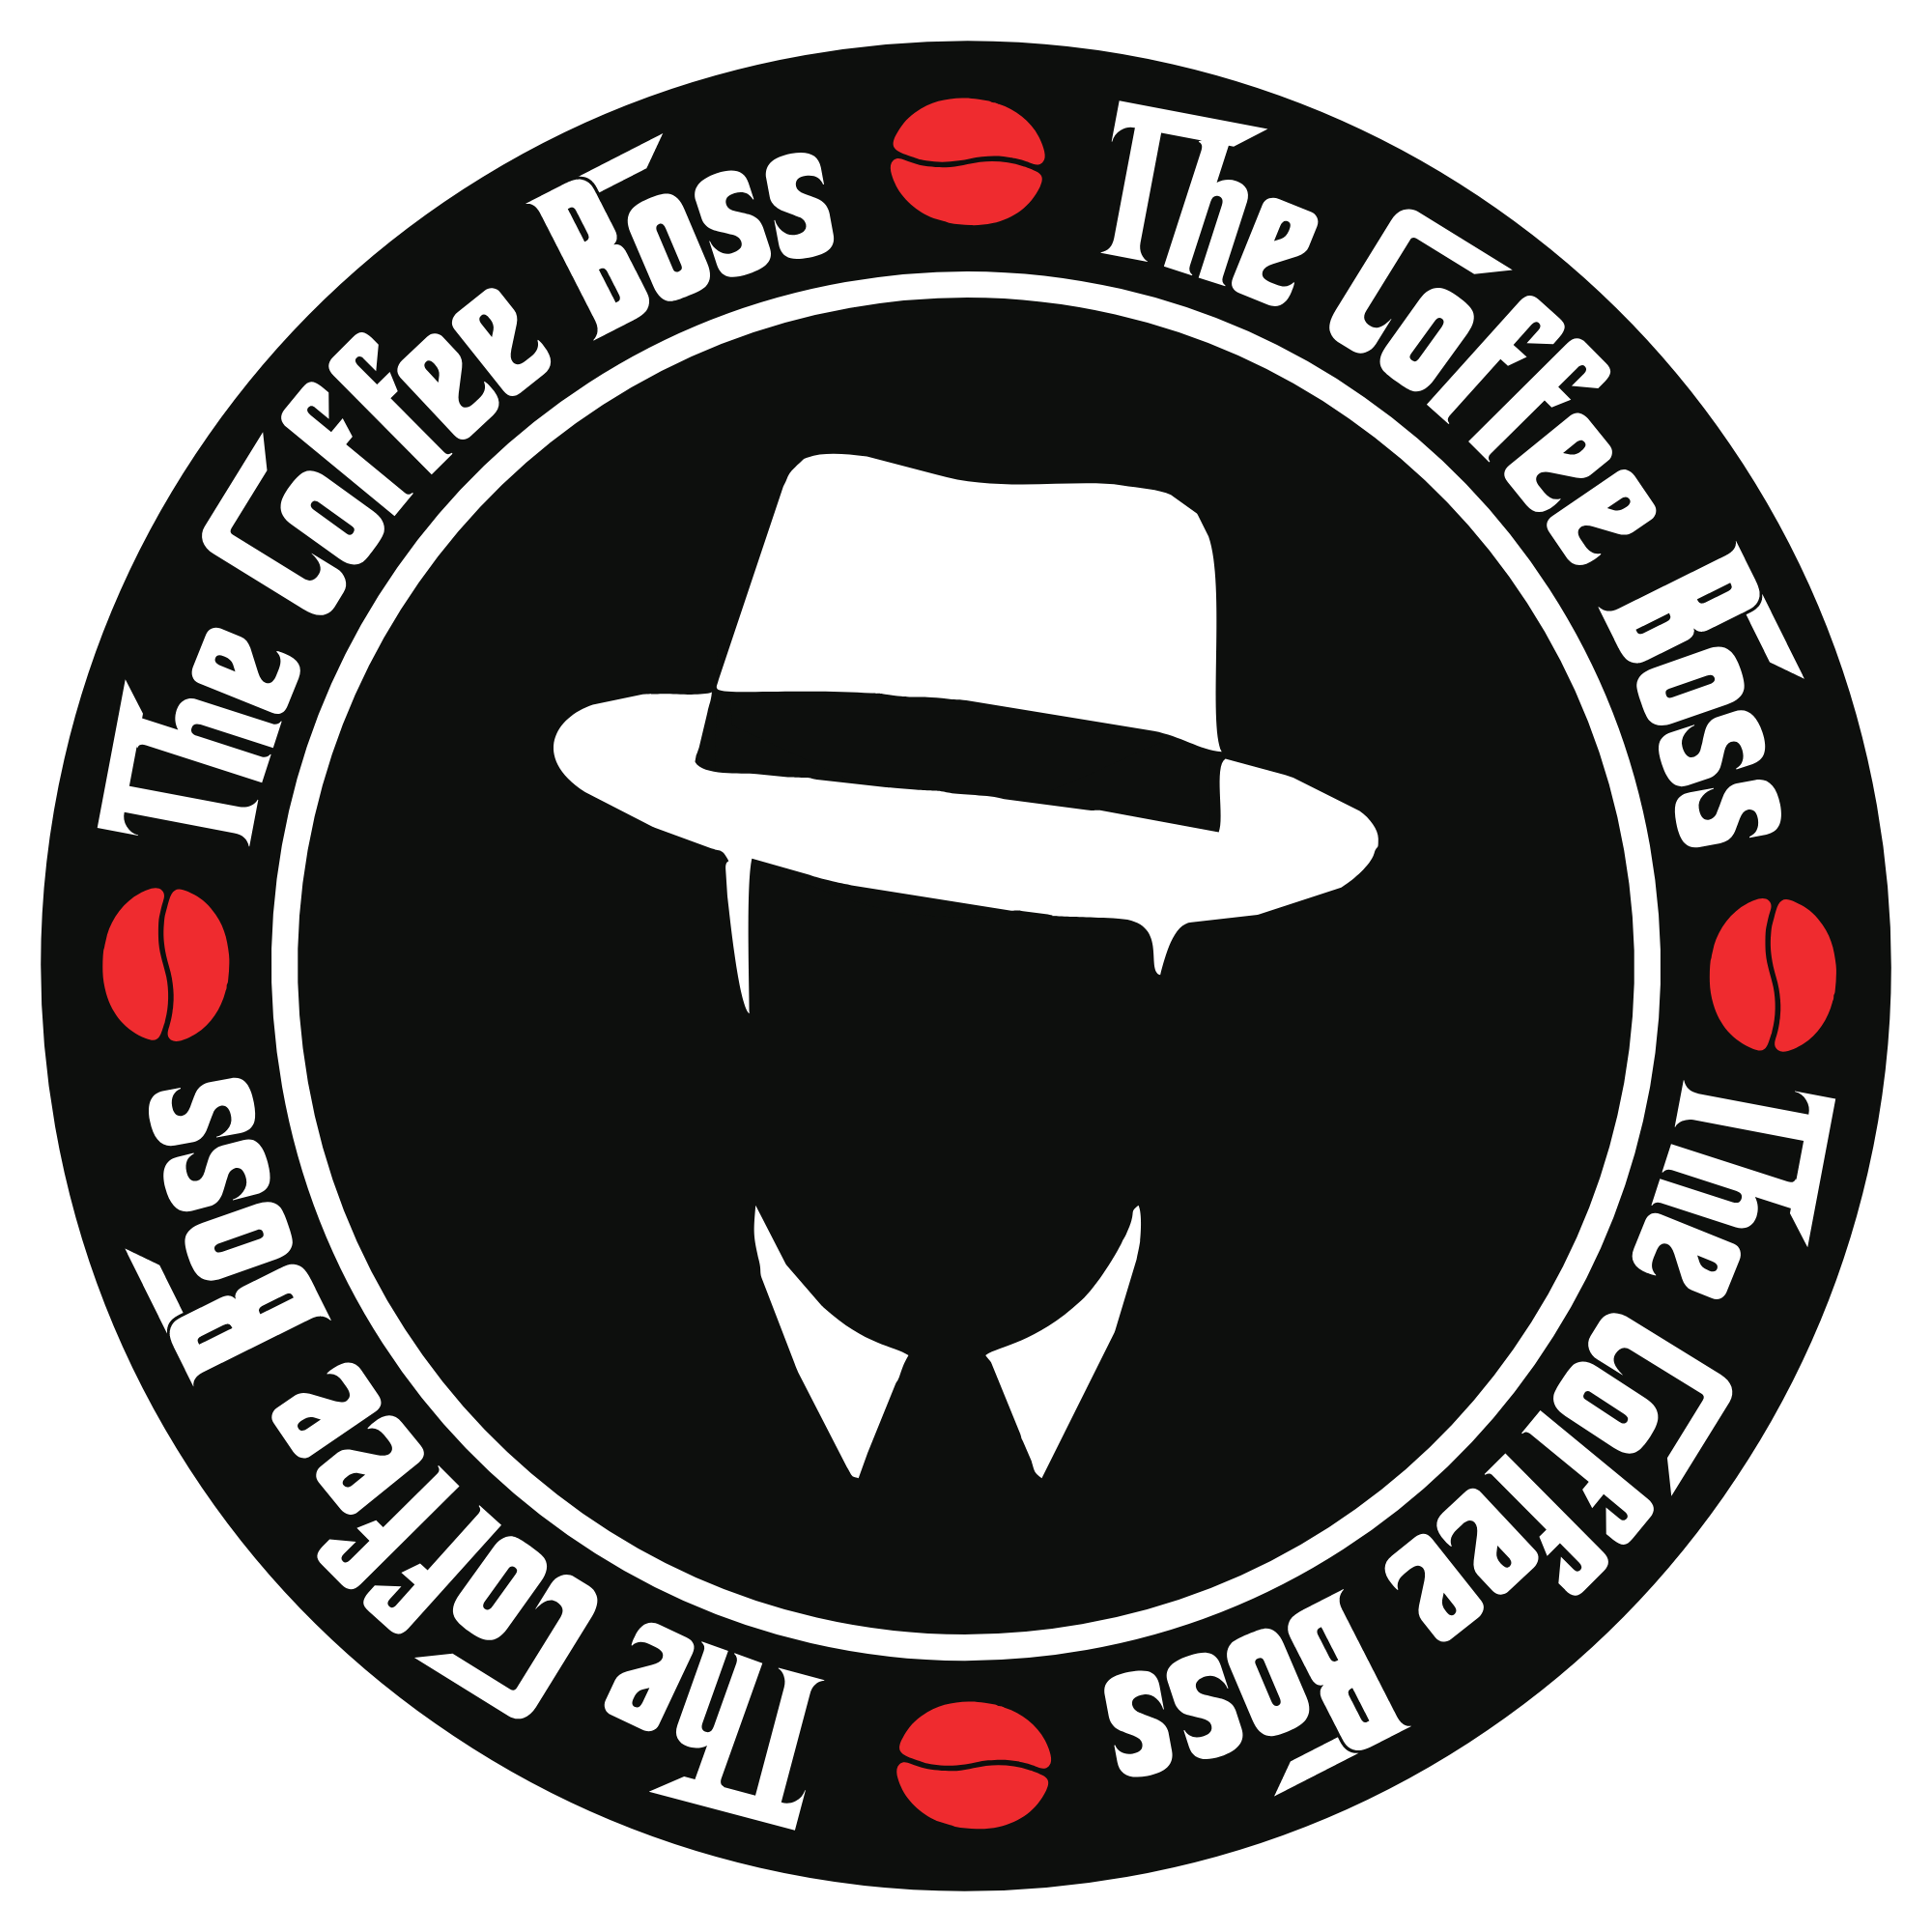 Logo of The Coffee Boss Coffee Machines In Chester, Cheshire